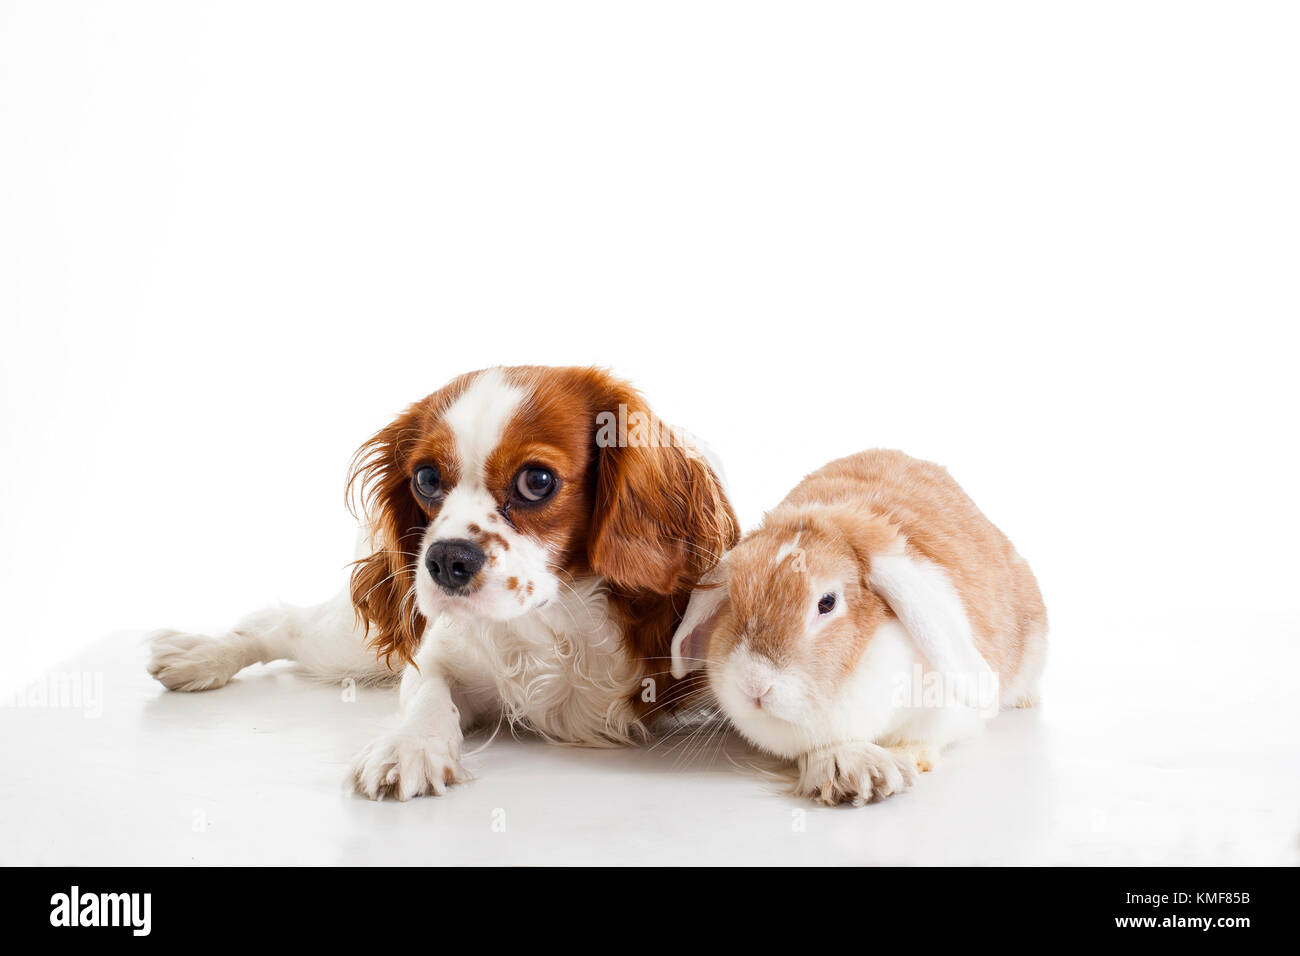 Cute cavalier king charles spaniel dog puppy on isolated white studio background. Dog puppy with lop bunny rabbit. Stock Photo